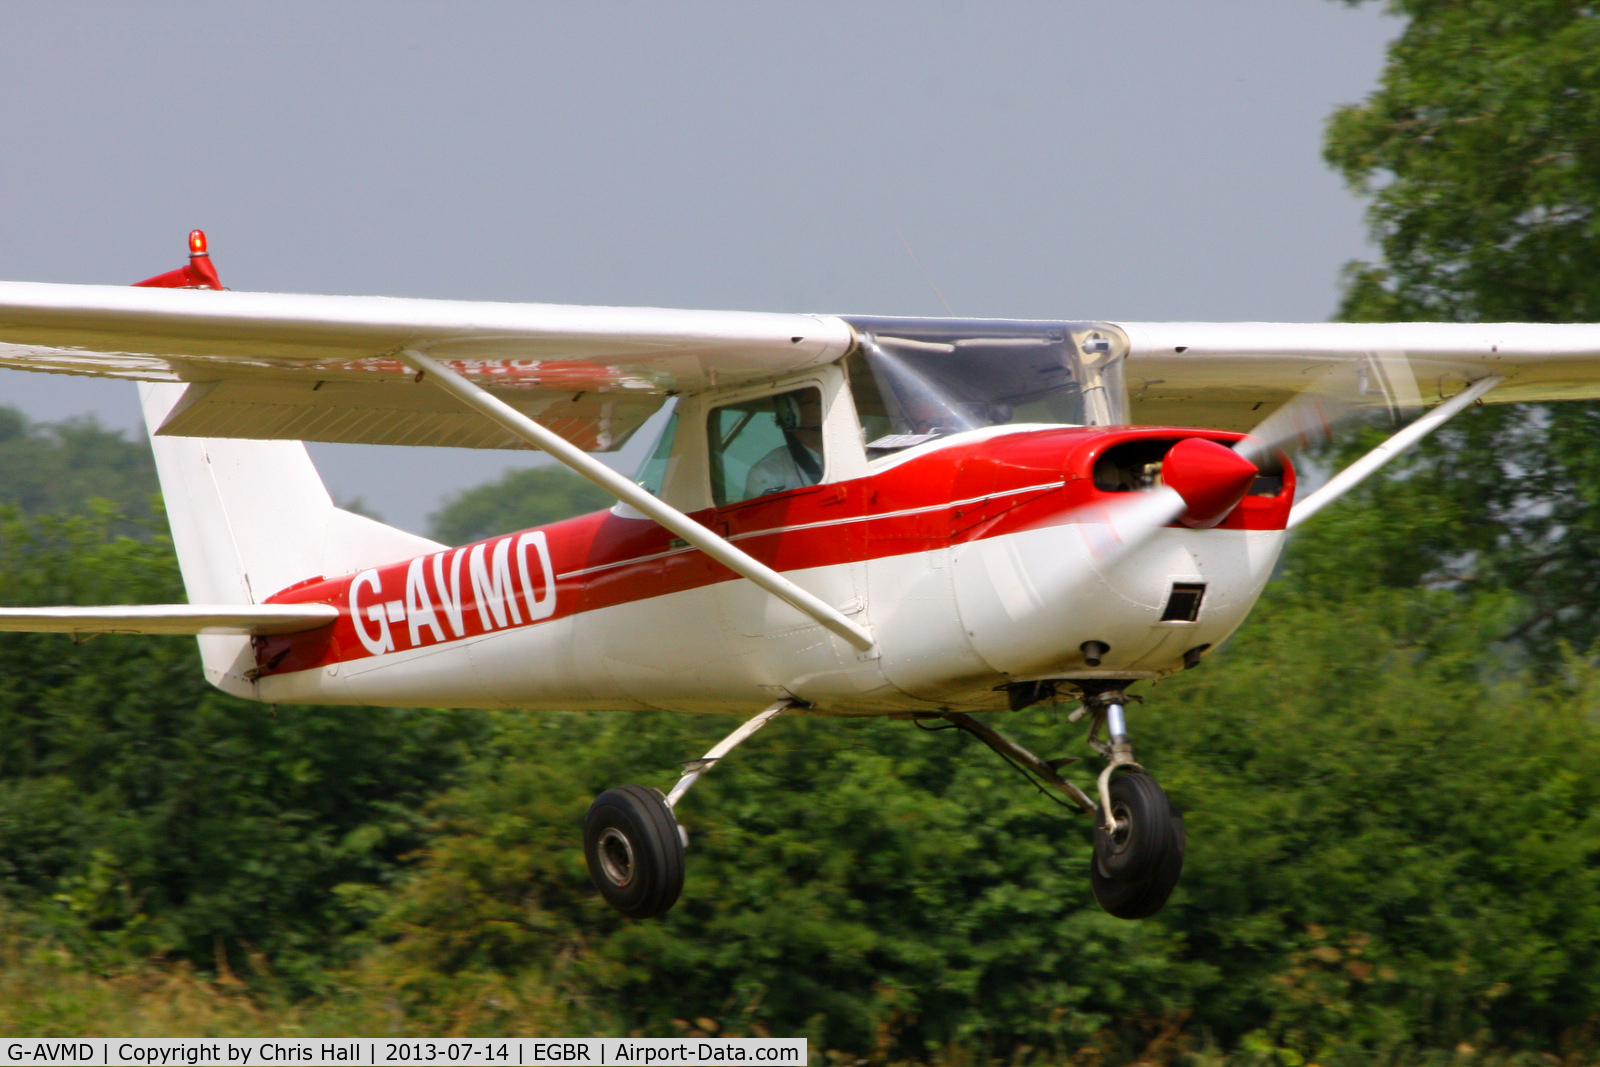 G-AVMD, 1966 Cessna 150G C/N 150-65504, at the Real Aeroplane Club's Wings & Wheels fly-in, Breighton